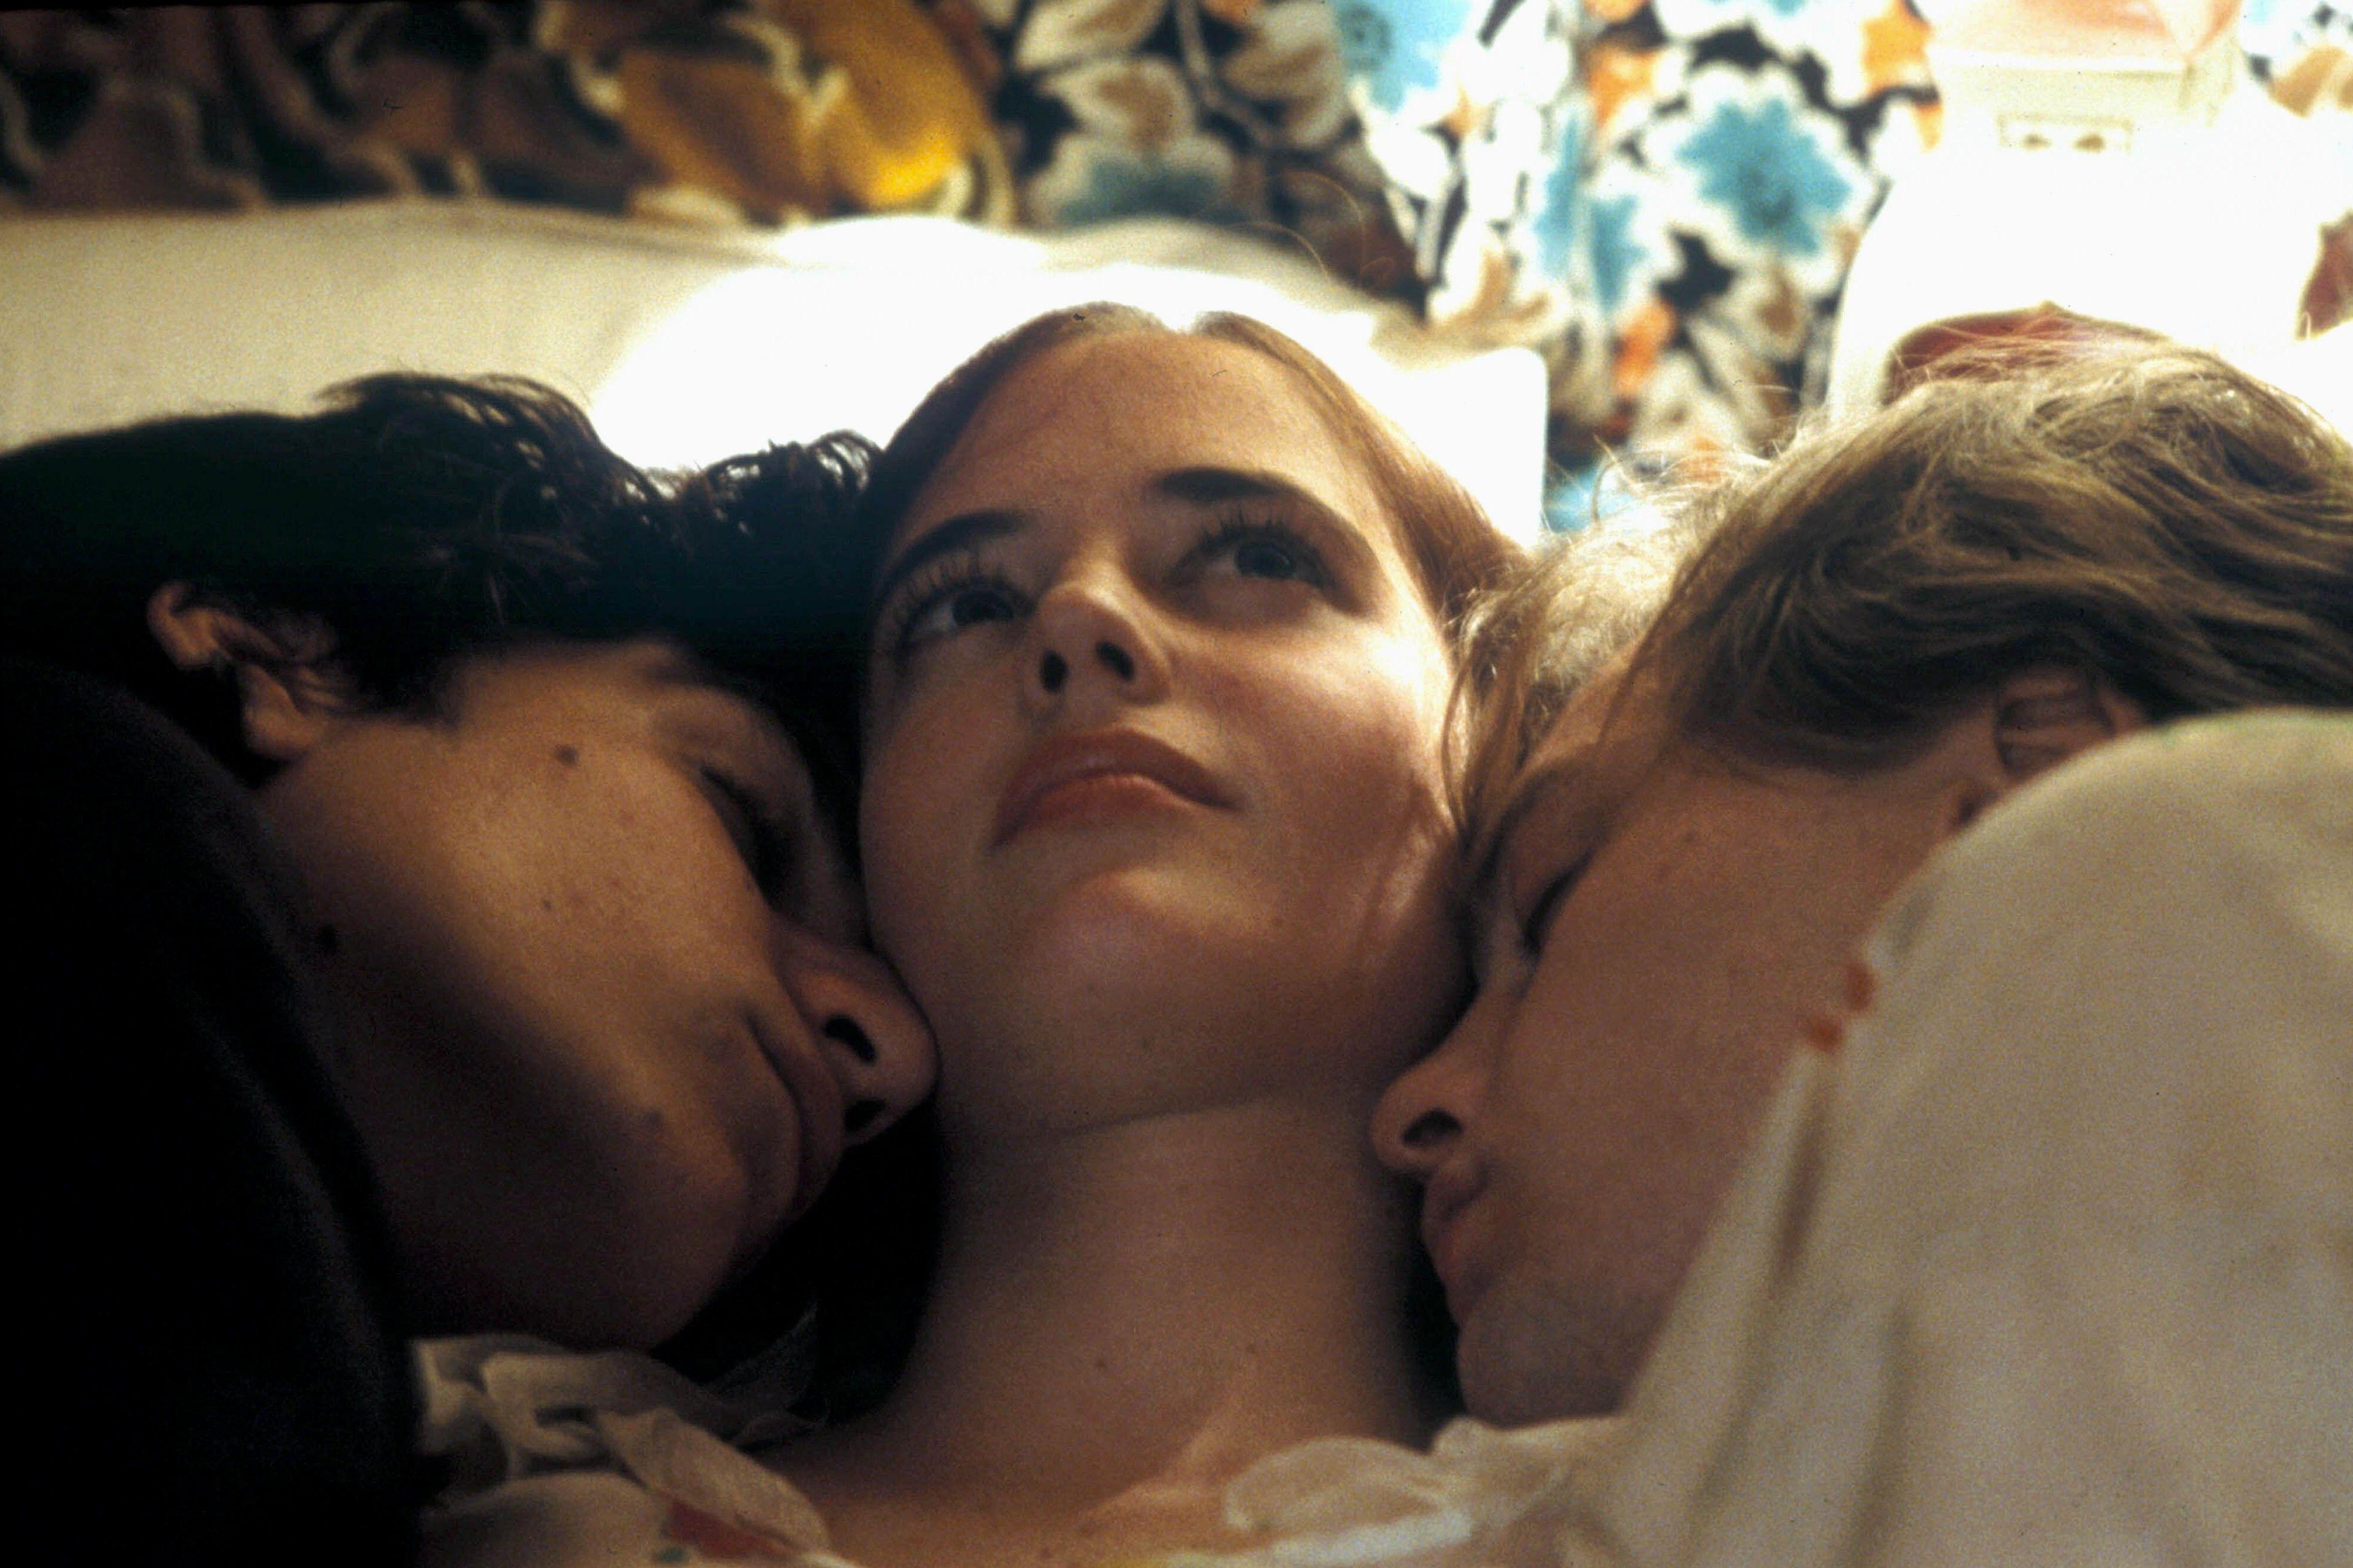 The Dreamers (2003) is a five-star twisted Italian love triangle